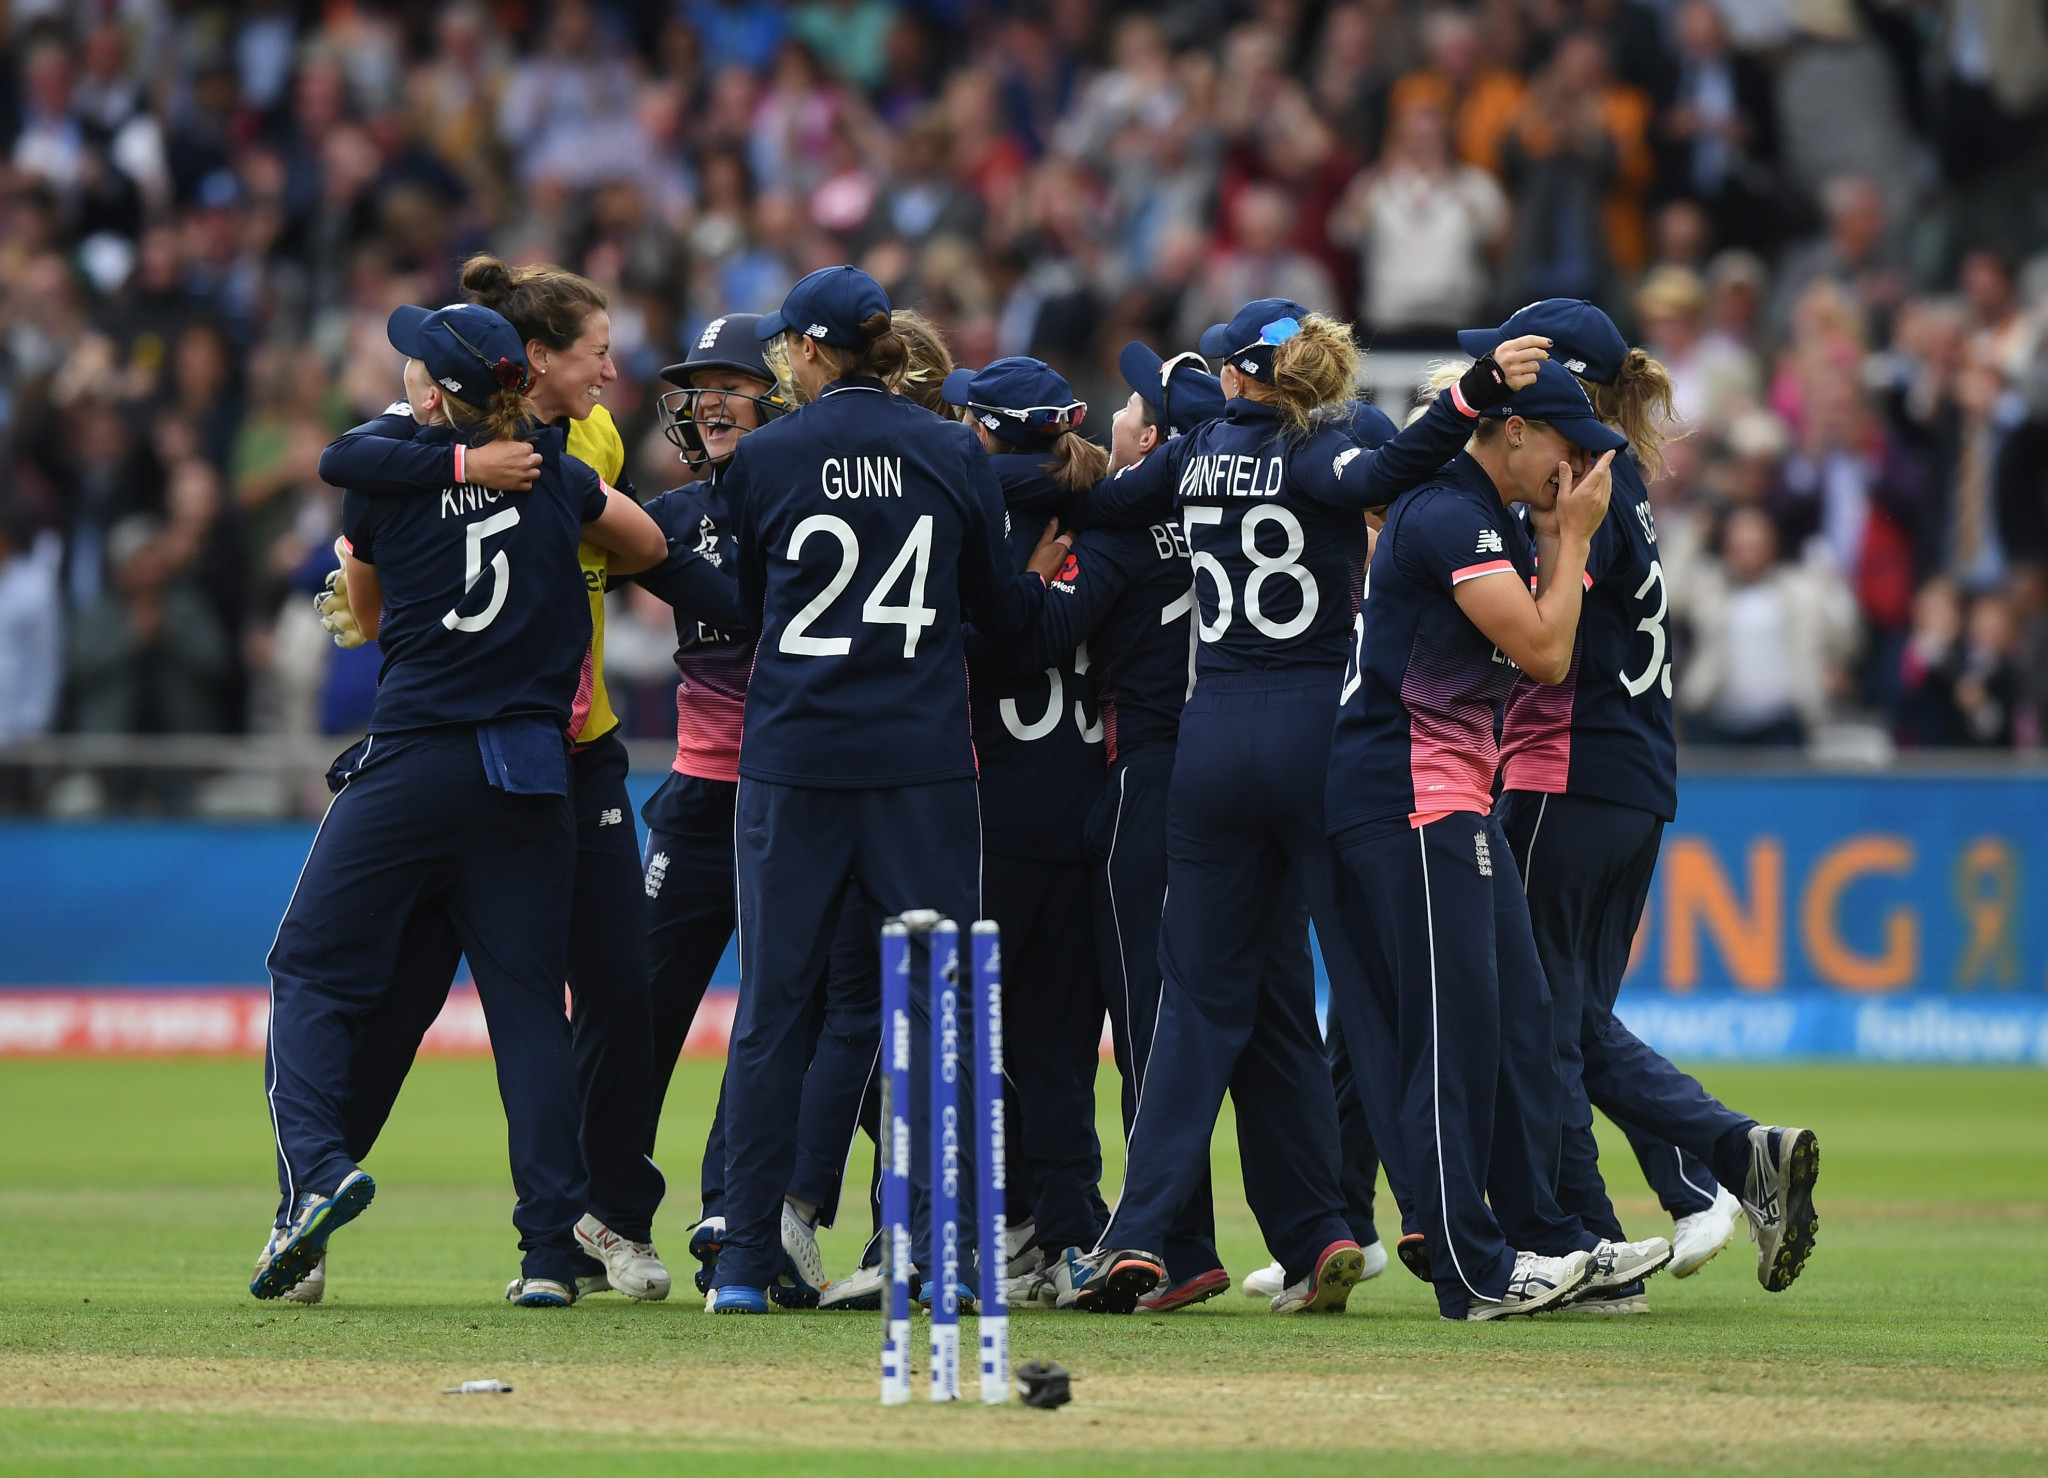 Kia will continue their sponsorship of the England women's team ©Getty Images